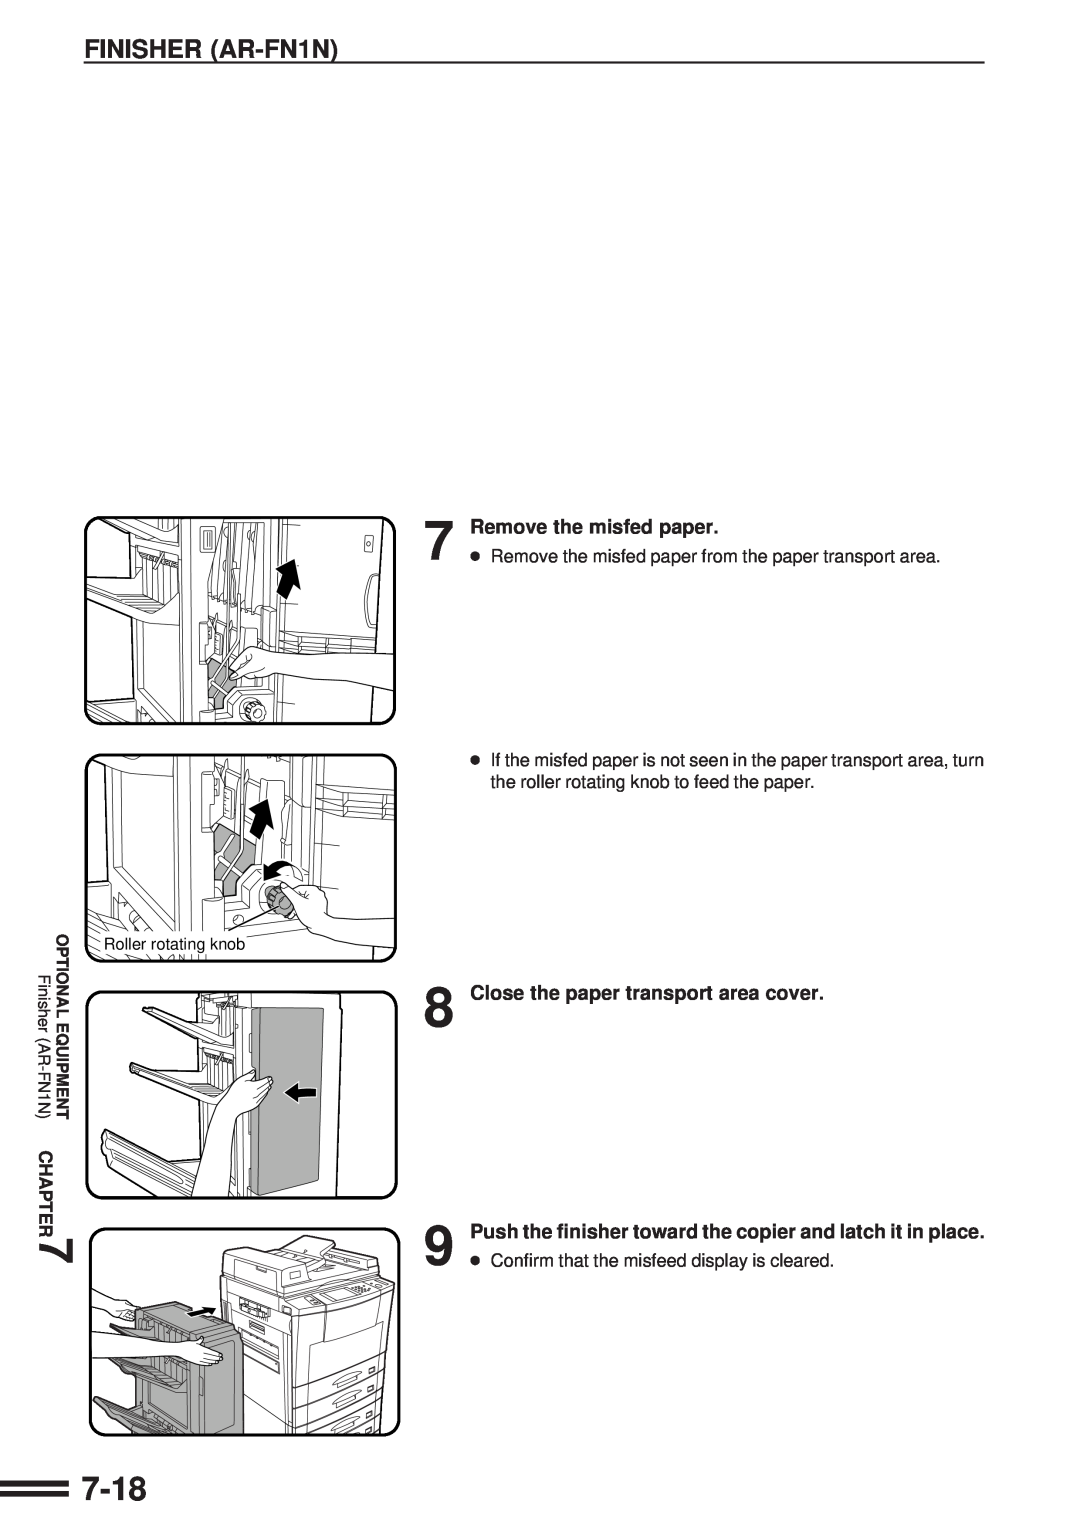 Sharp AR-287 manual 7-18, Remove the misfed paper, Close the paper transport area cover 